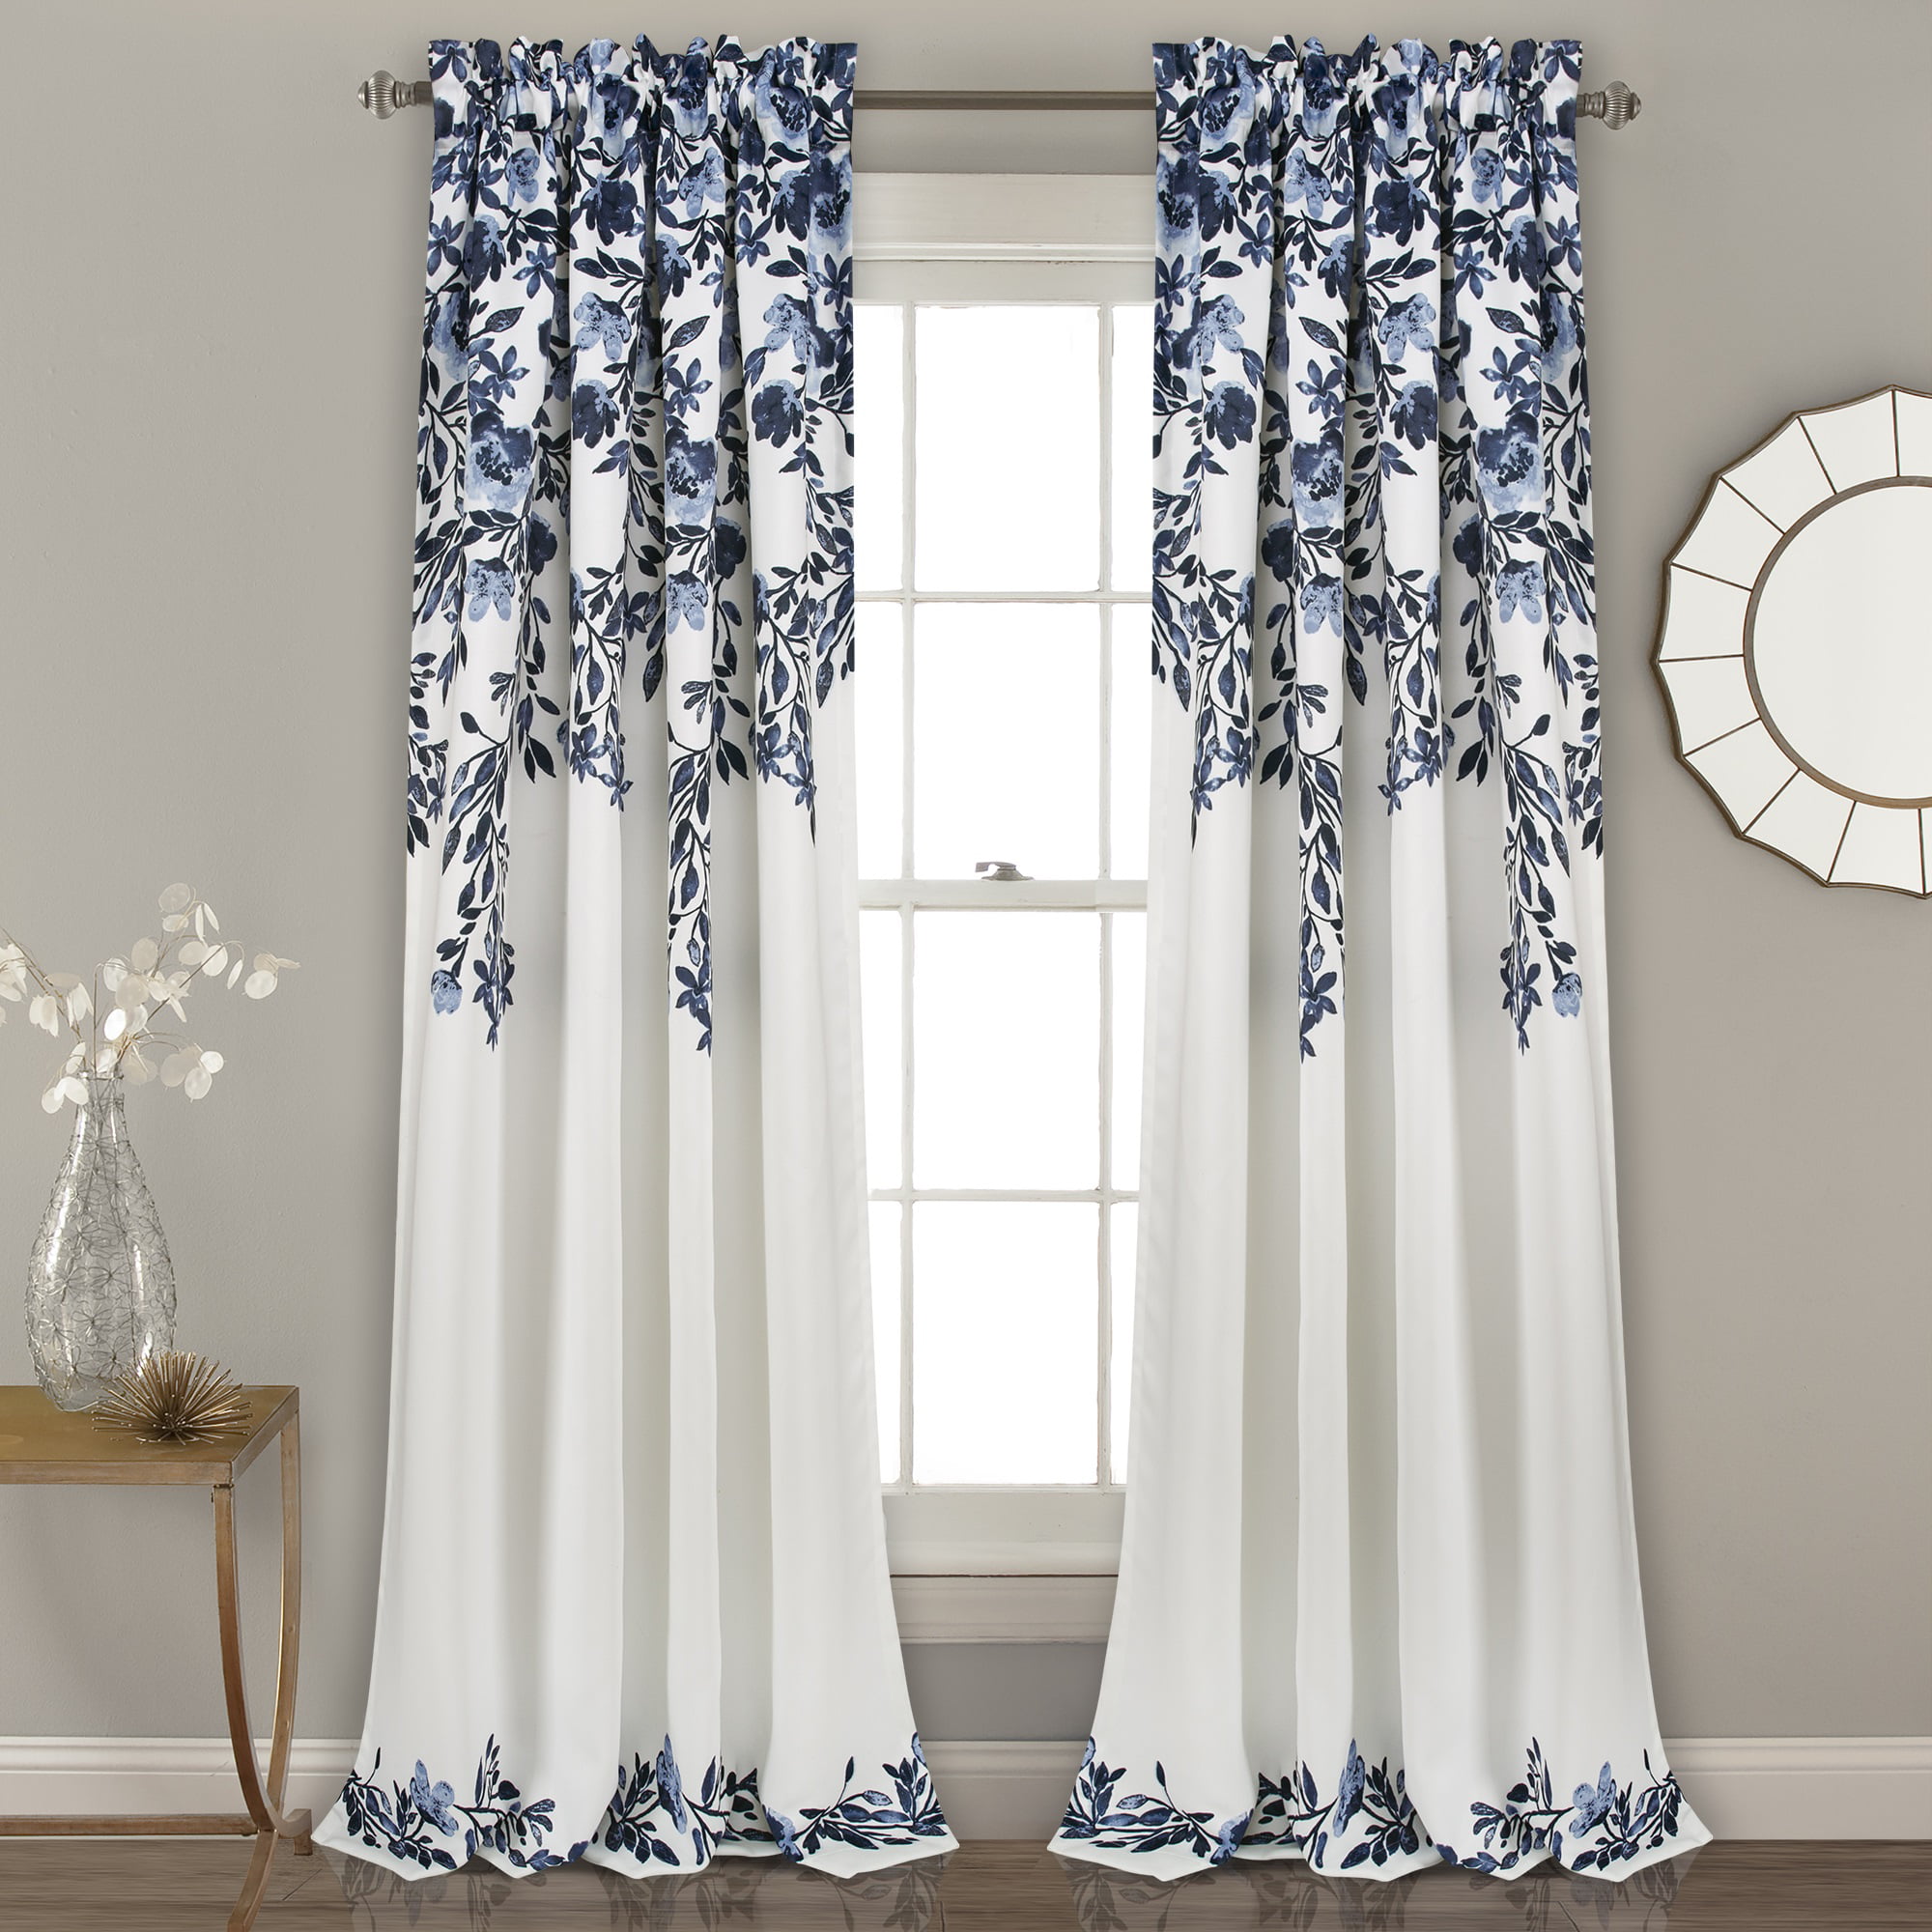 Details about   Powder Blue Shabby Chic Roses Window Valance Curtain Cotton 43"W x 15"L 